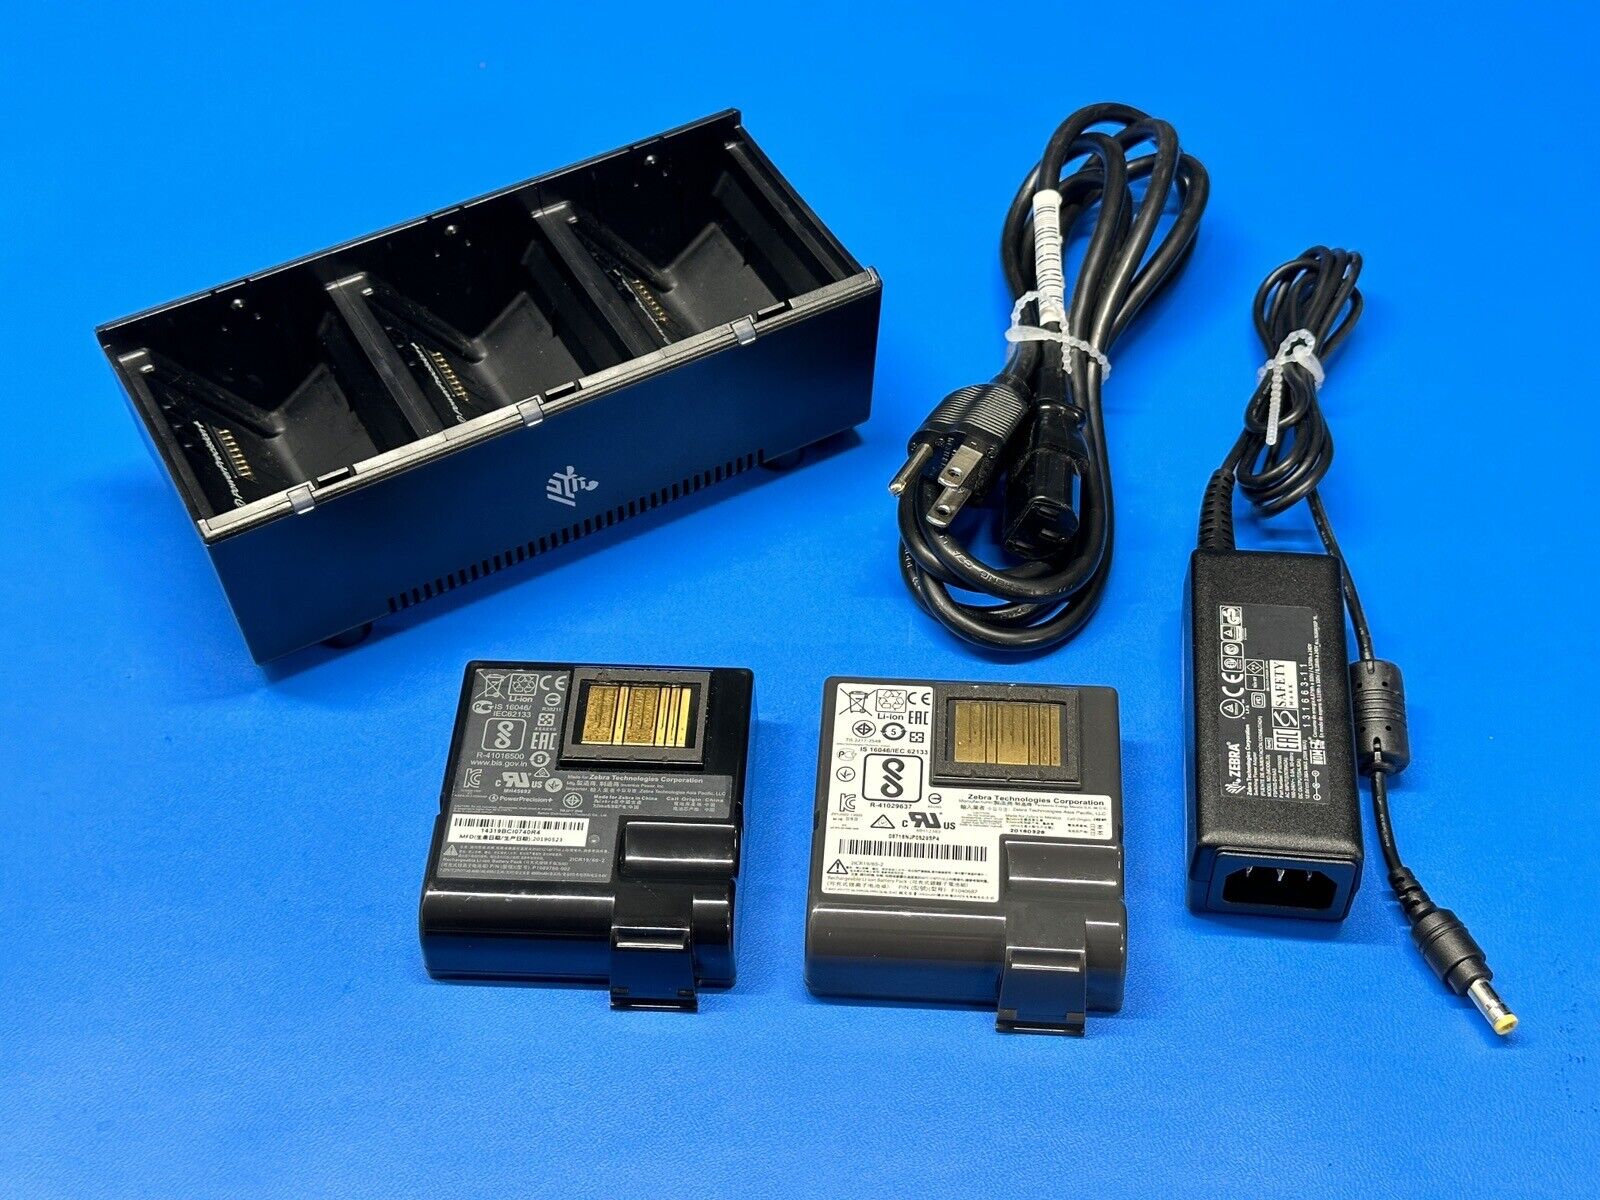 LOT- Genuine Zebra QLN420 Batteries and Charger (2 battery, 1 charger)